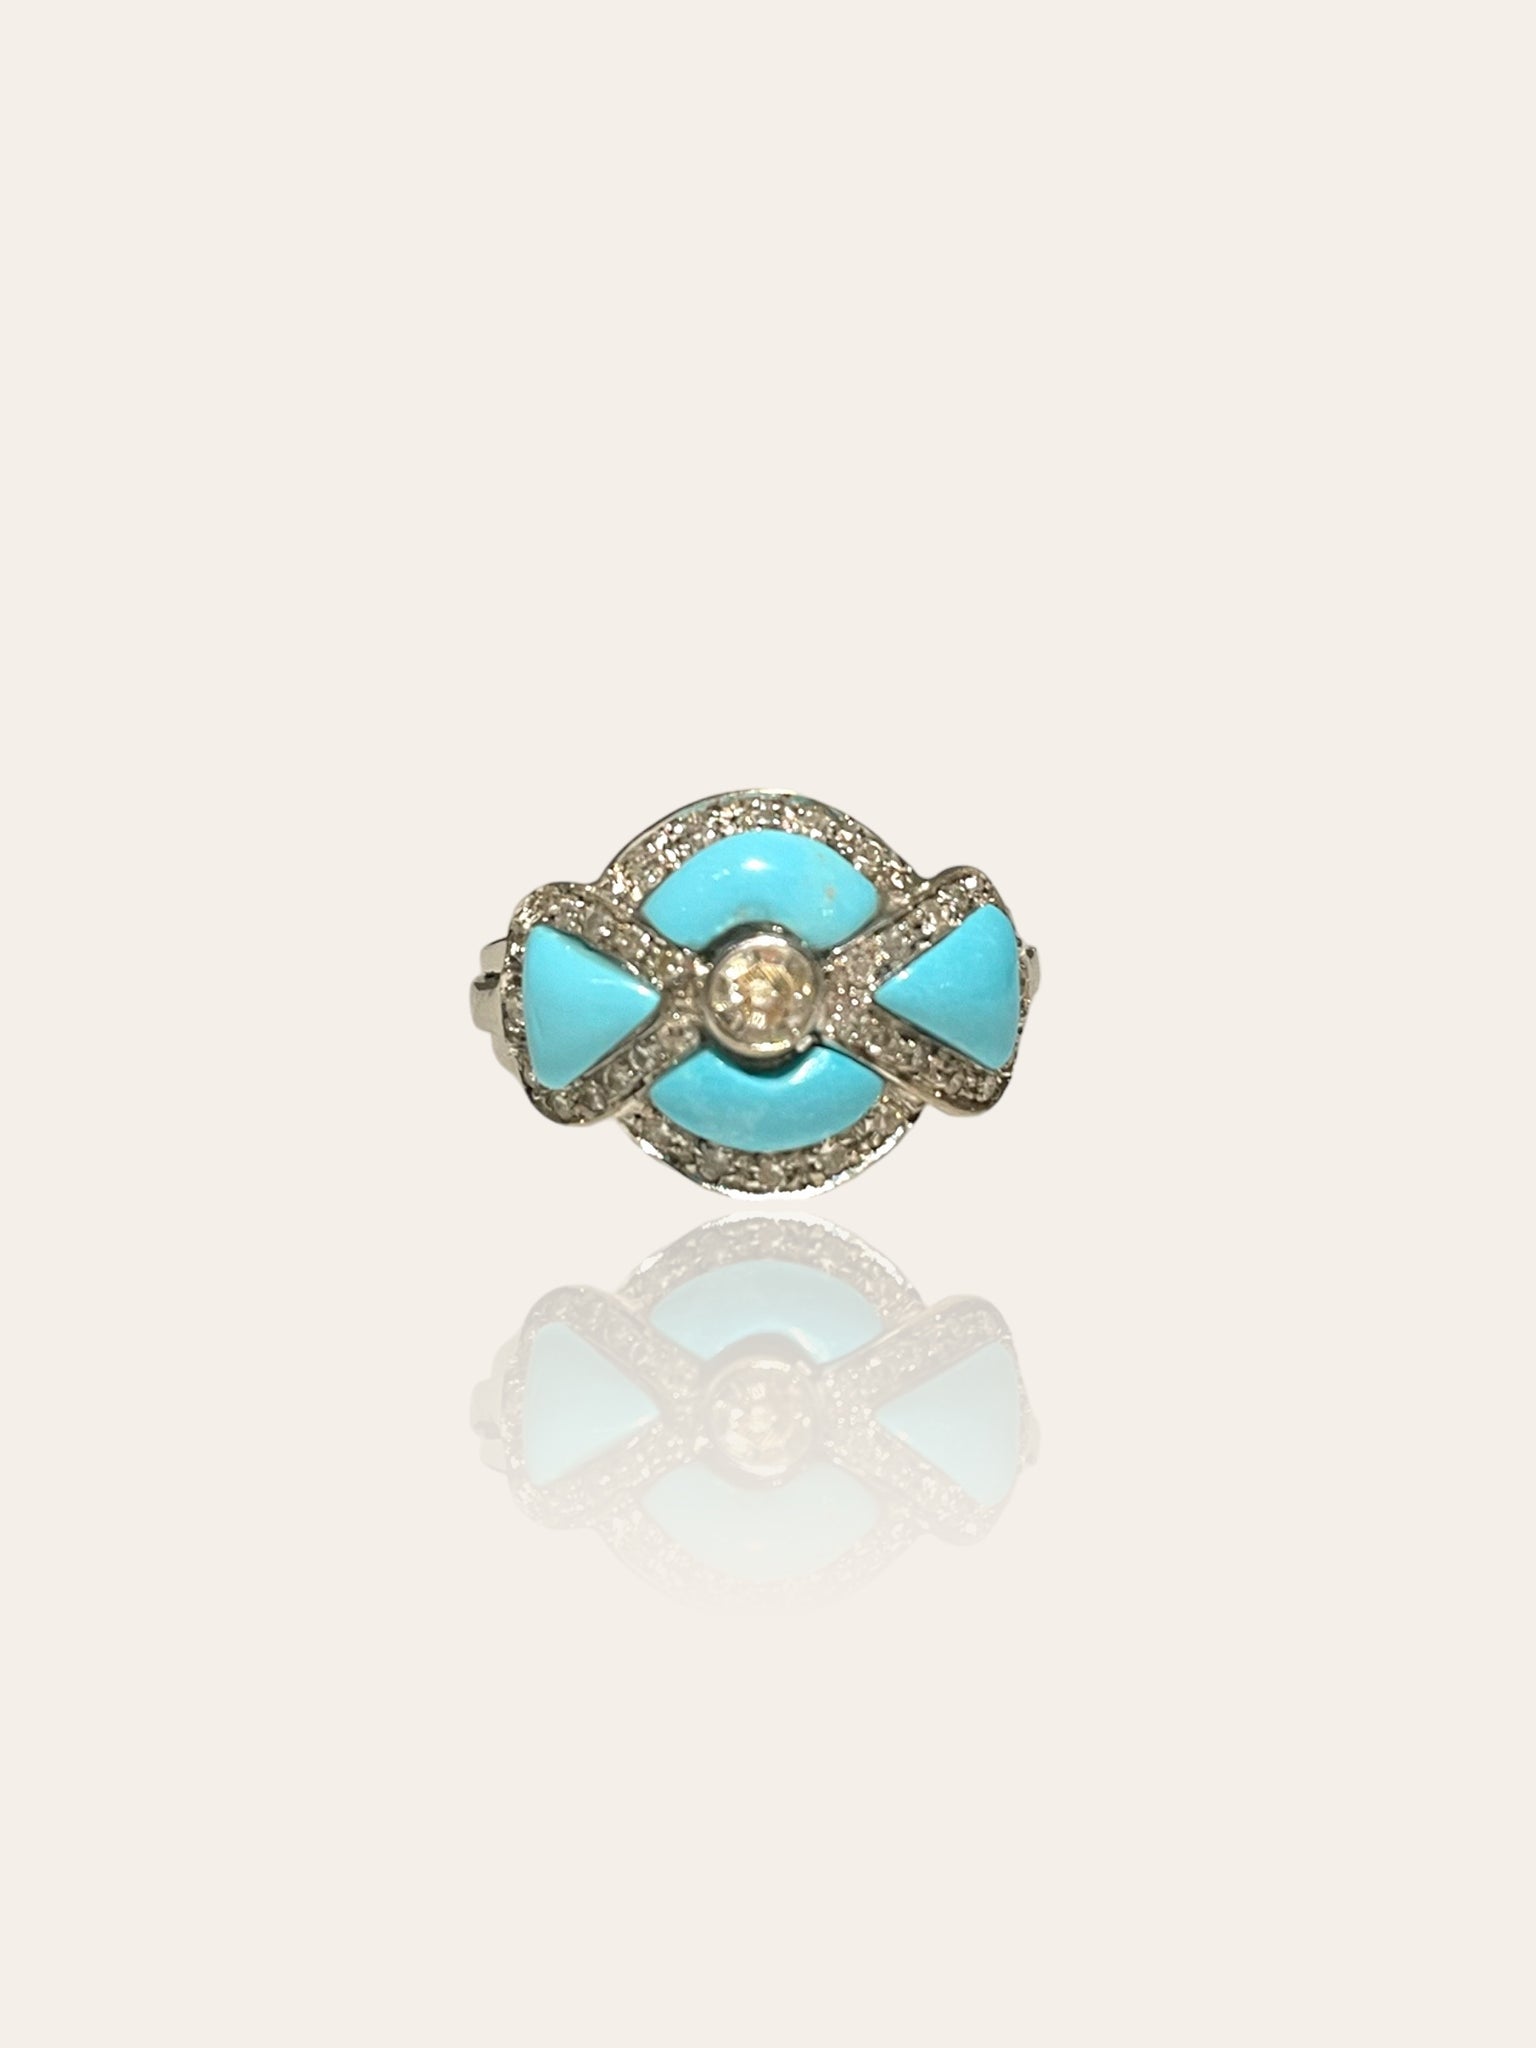 Vintage white gold ring with Turquoise